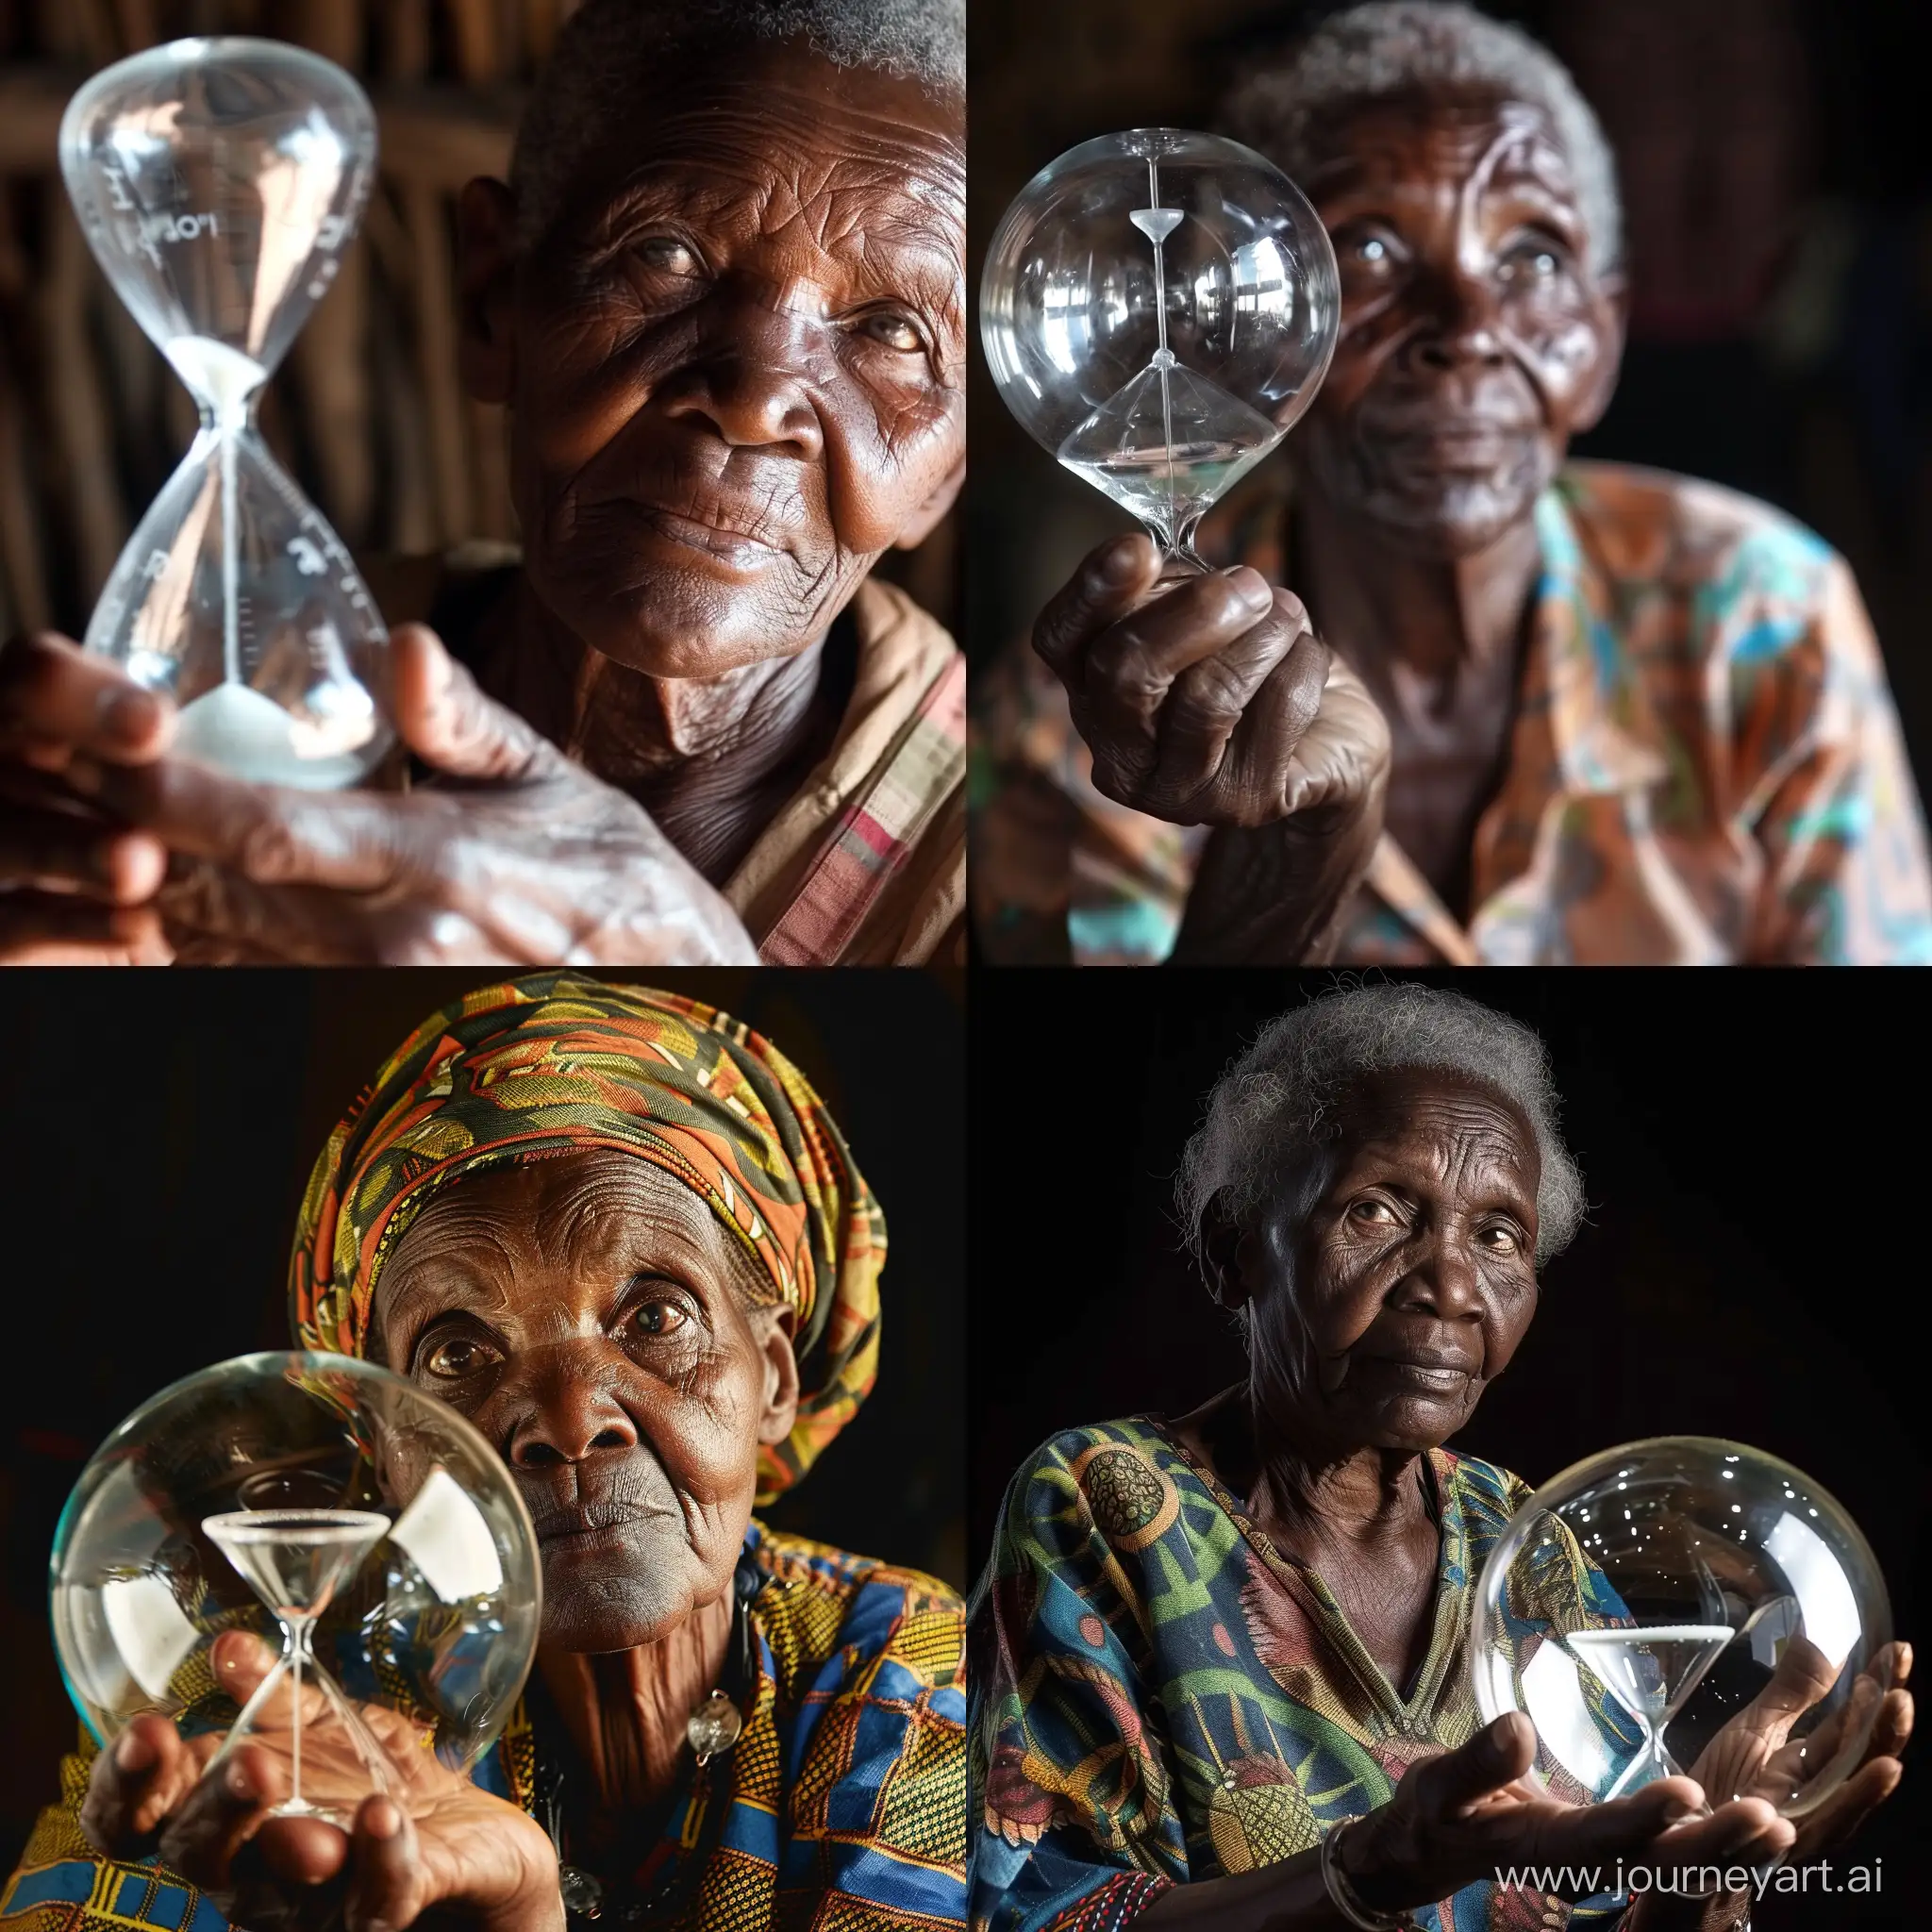 Old African woman holding a big clear and reflective hour glass. She is staring at it with a slight smile